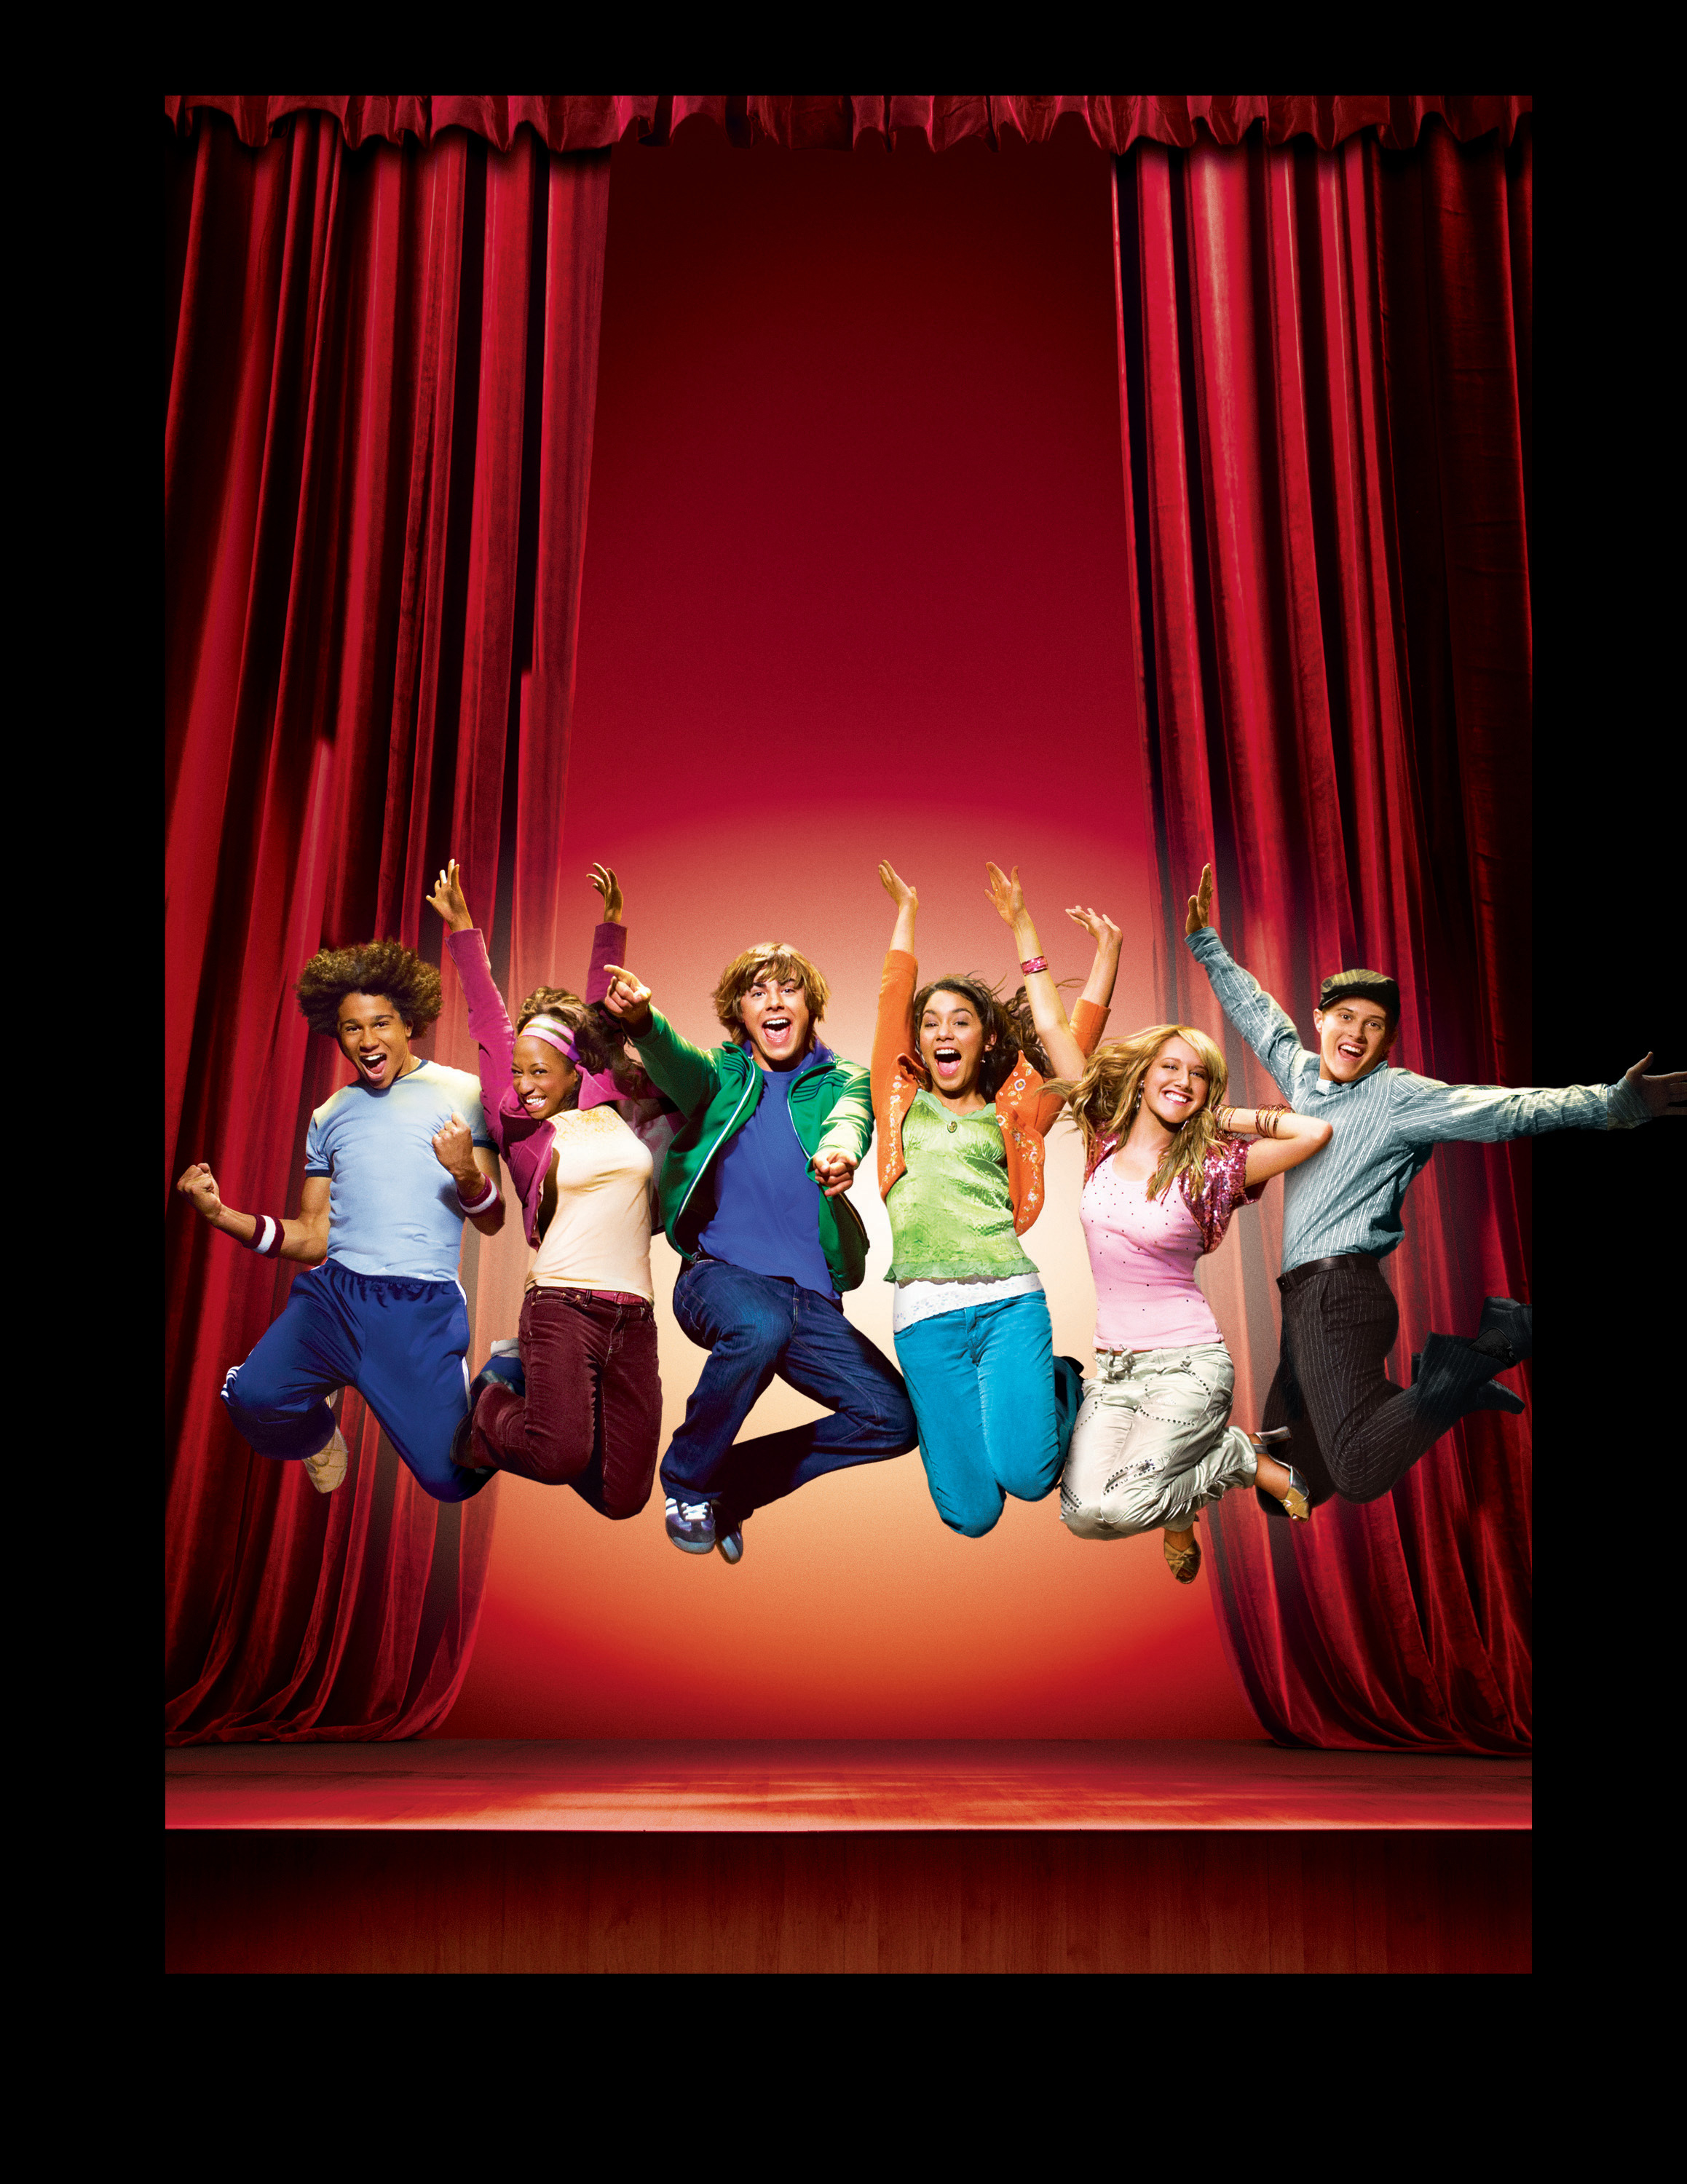 Poster for &quot;High School Musical&quot; featuring the main cast jumping in the air